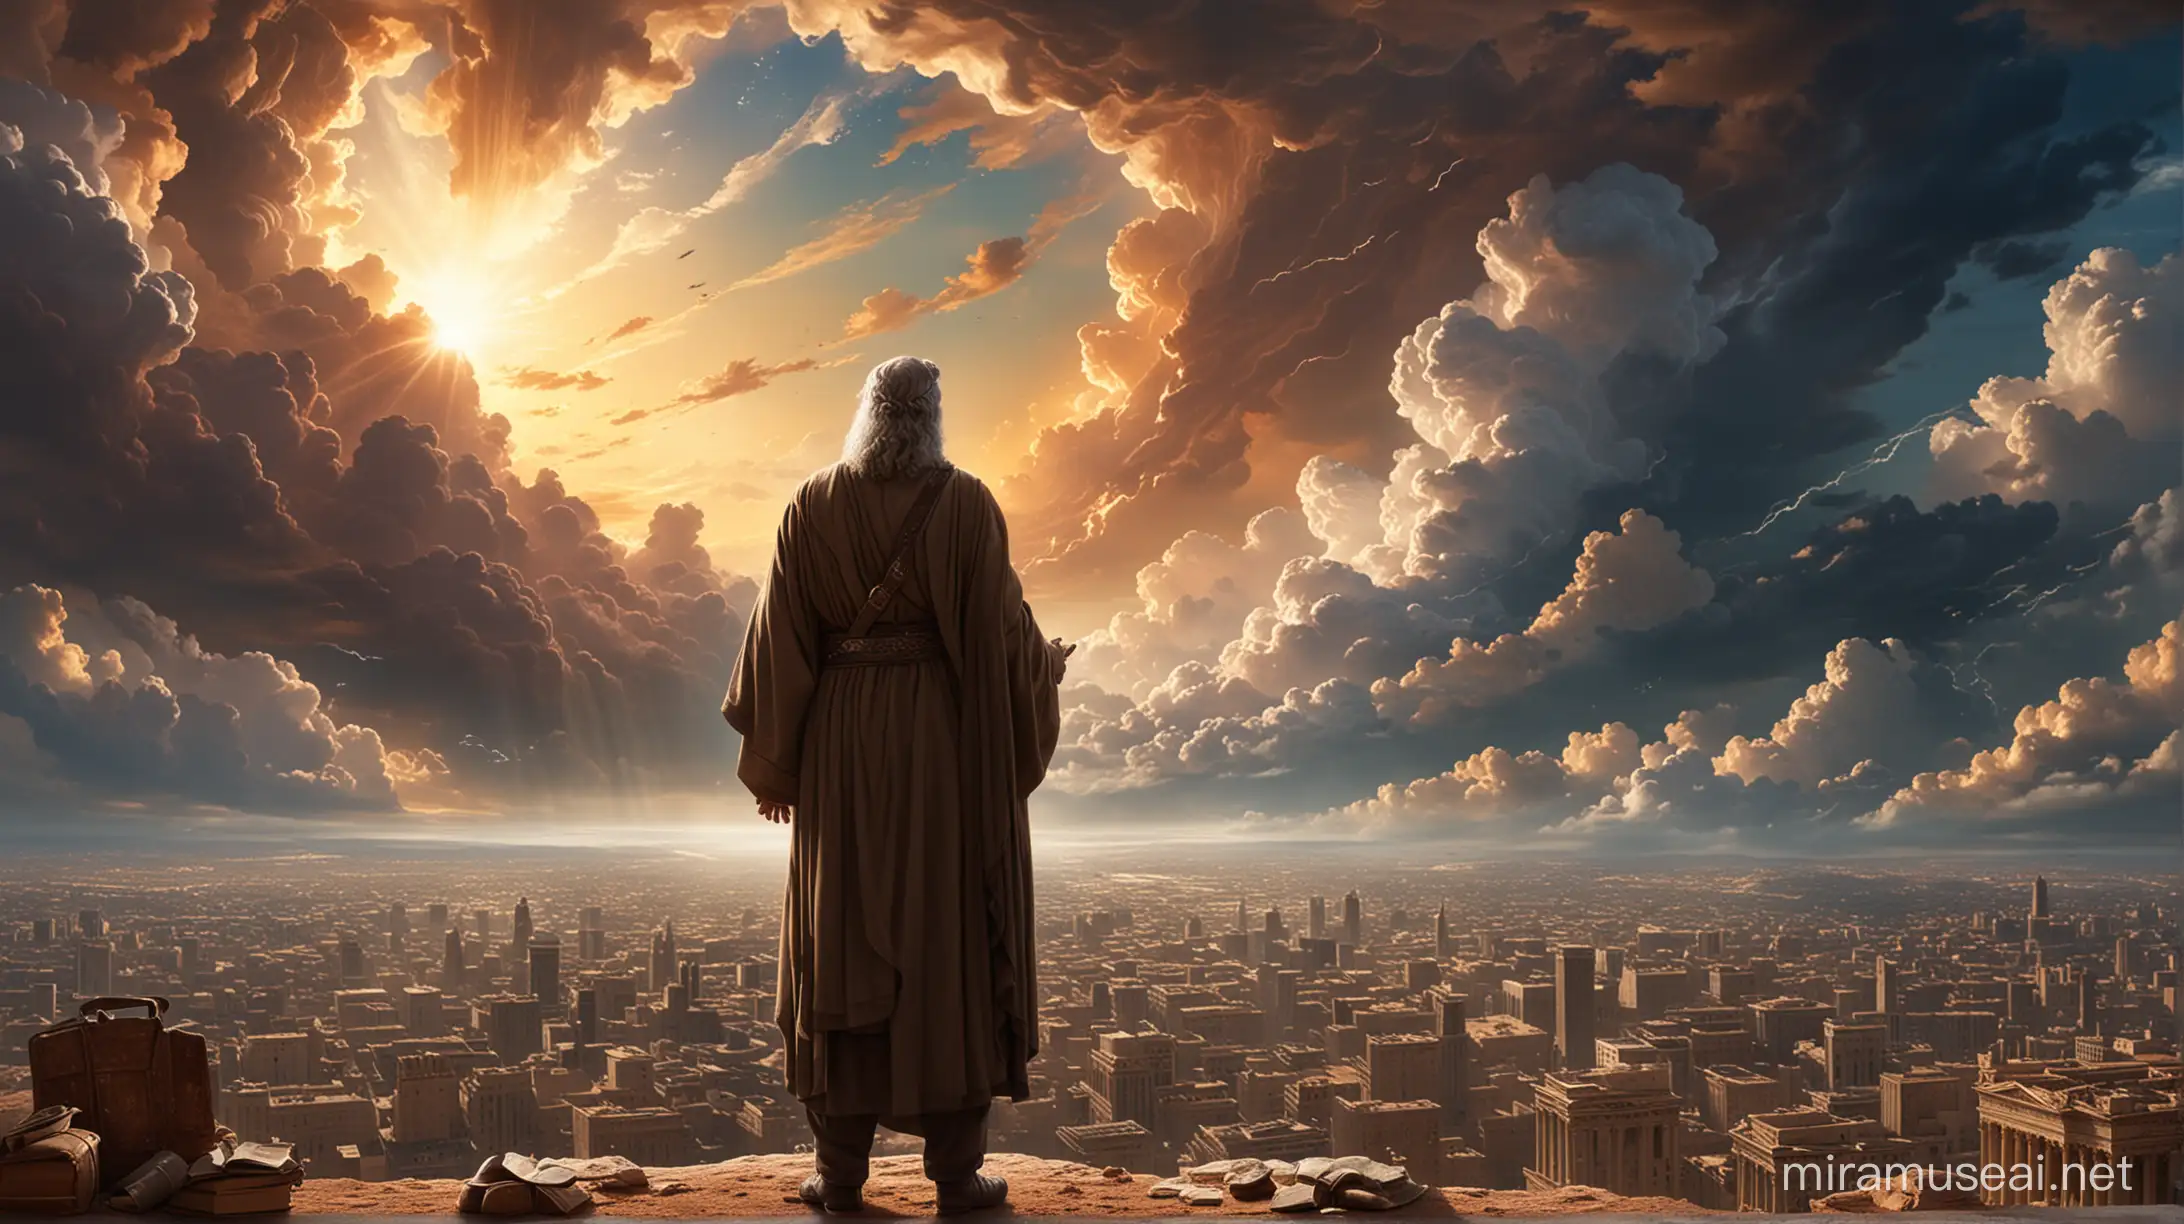 Abraham speaking with God, a city in the distance, and a magnificent sky